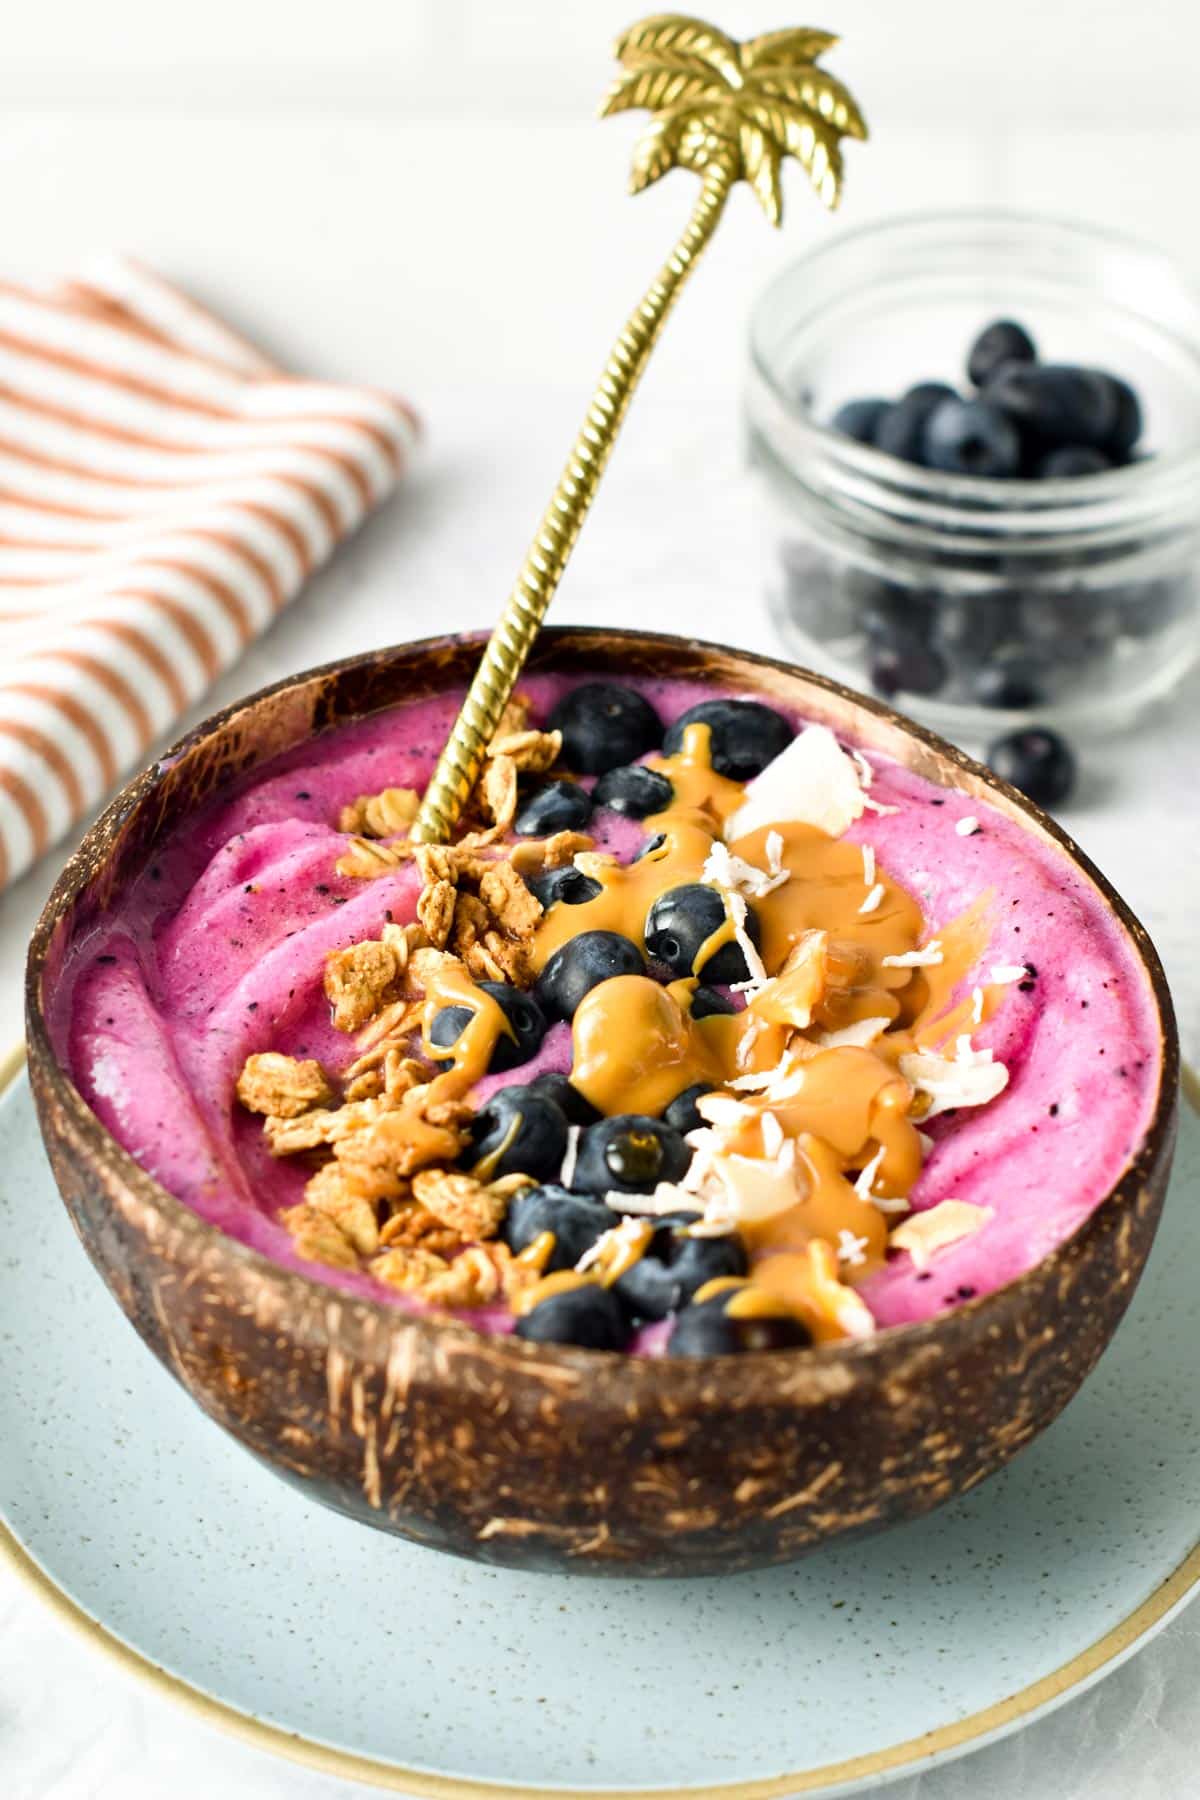 This Pitaya bowl is the most delicious frothy smoothie bowl to starts the day with vitamin C and feel energize all day. Plus, this dragon fruit bowl takes barely 5 minutes to make and require only 3 ingredients so even the kids can make this alone.This Pitaya bowl is the most delicious frothy smoothie bowl to starts the day with vitamin C and feel energize all day. Plus, this dragon fruit bowl takes barely 5 minutes to make and require only 3 ingredients so even the kids can make this alone.